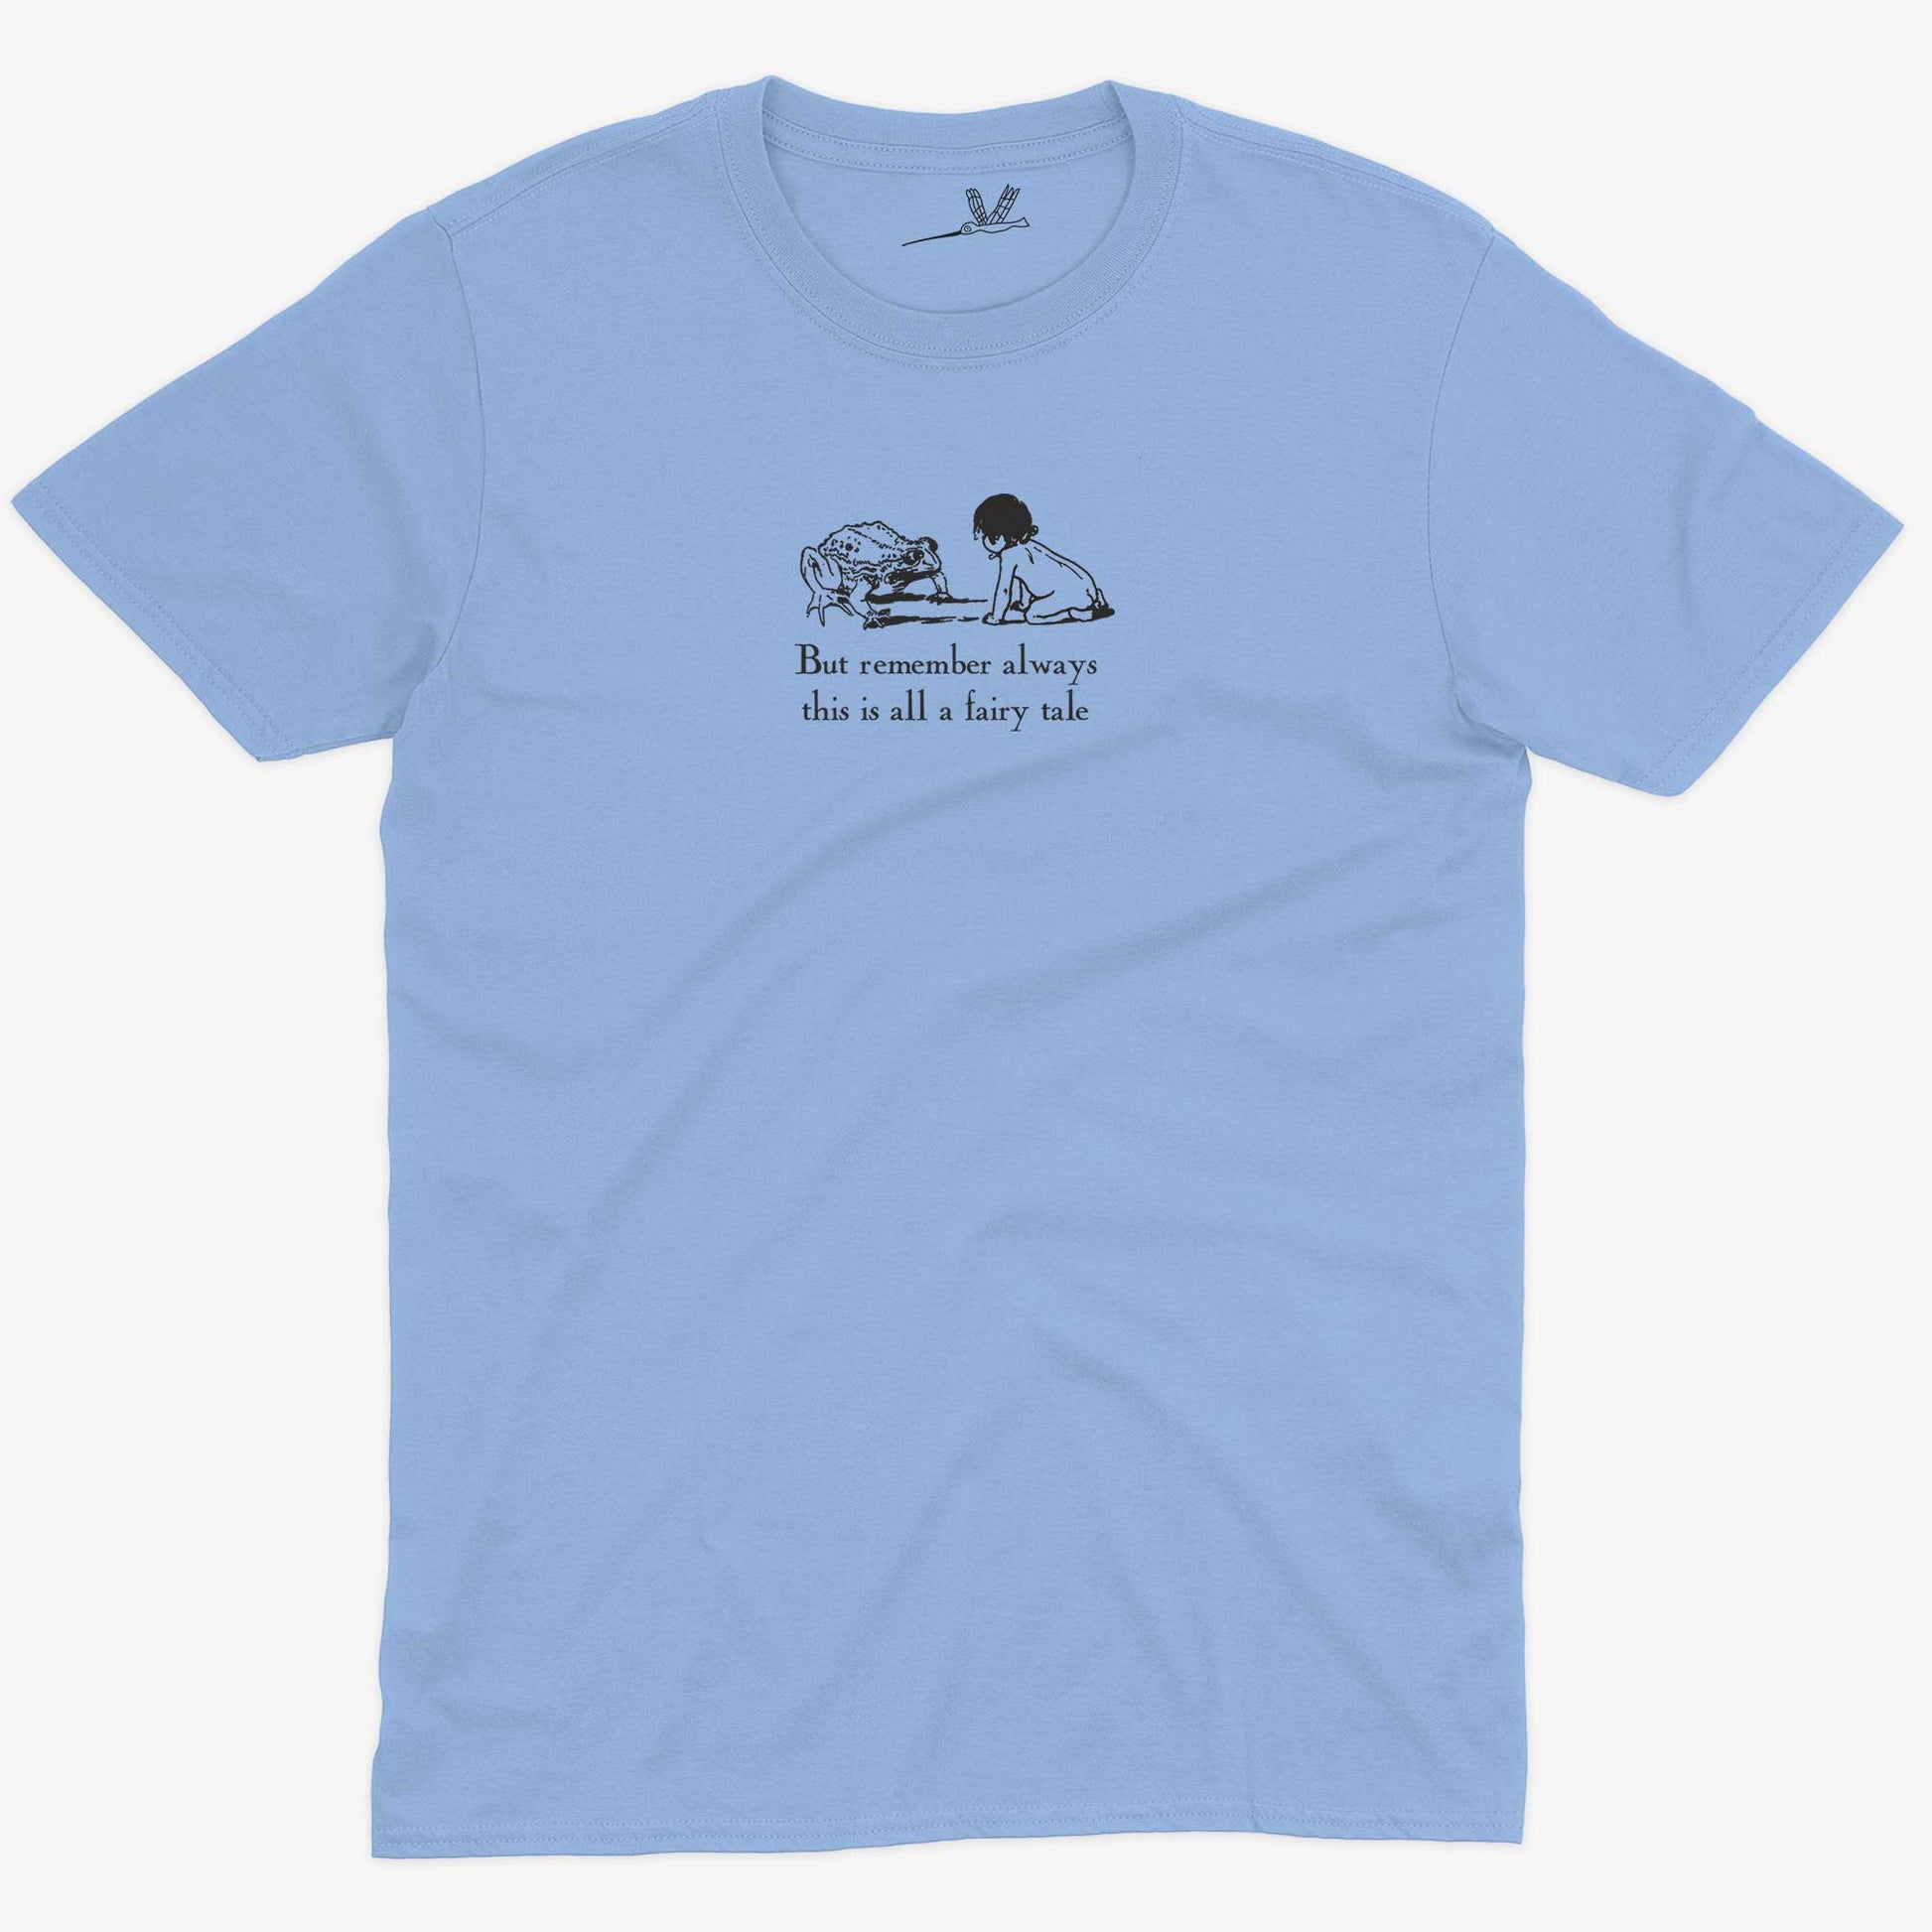 But remember always this is all a fairy tale Unisex Or Women's Cotton T-shirt-Baby Blue-Unisex